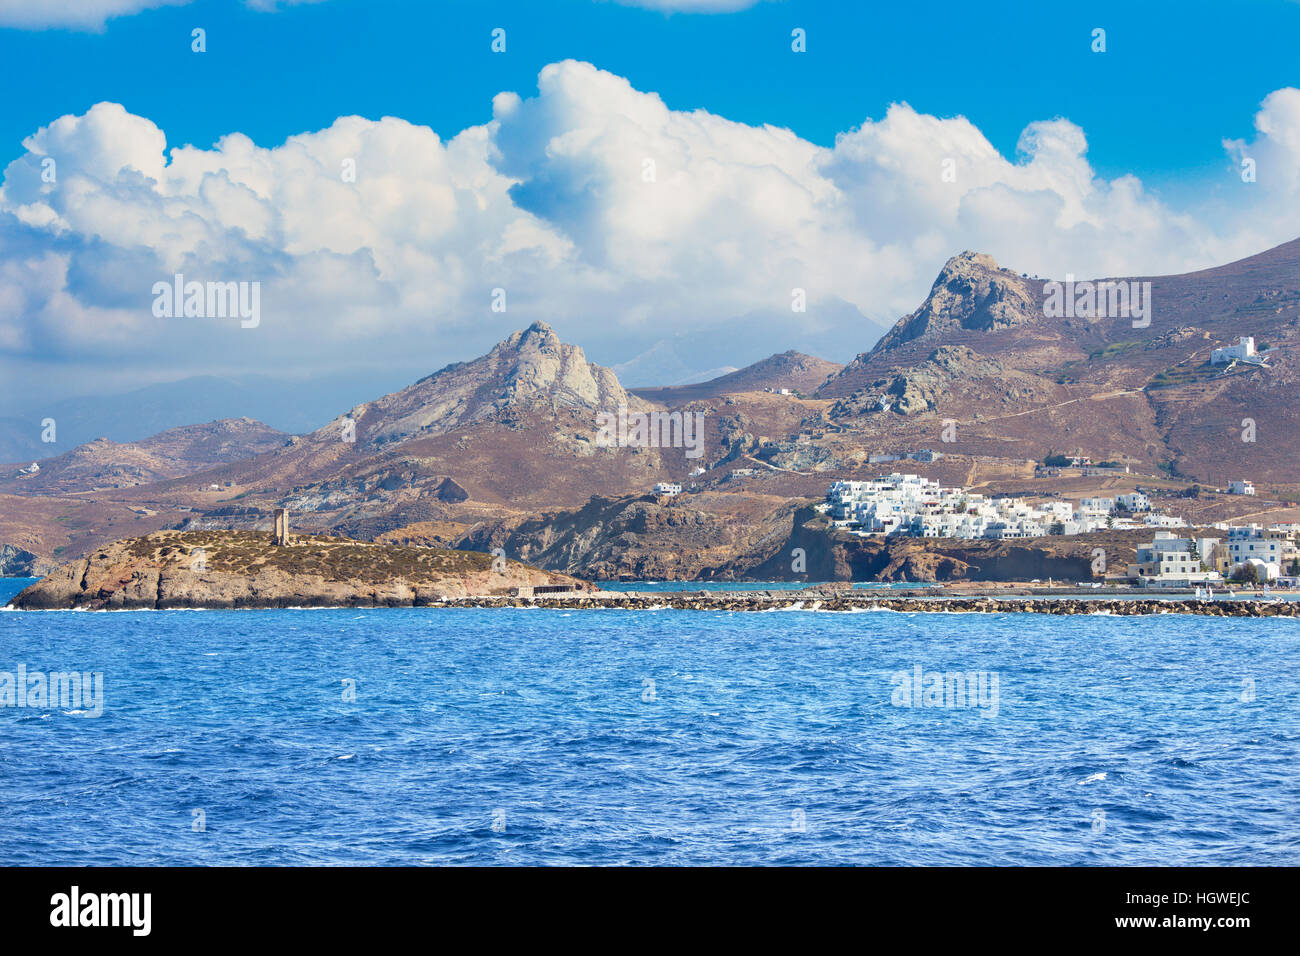 Naxos - The part of town Chora (Hora) on the Naxos island in the Aegean Sea. Stock Photo